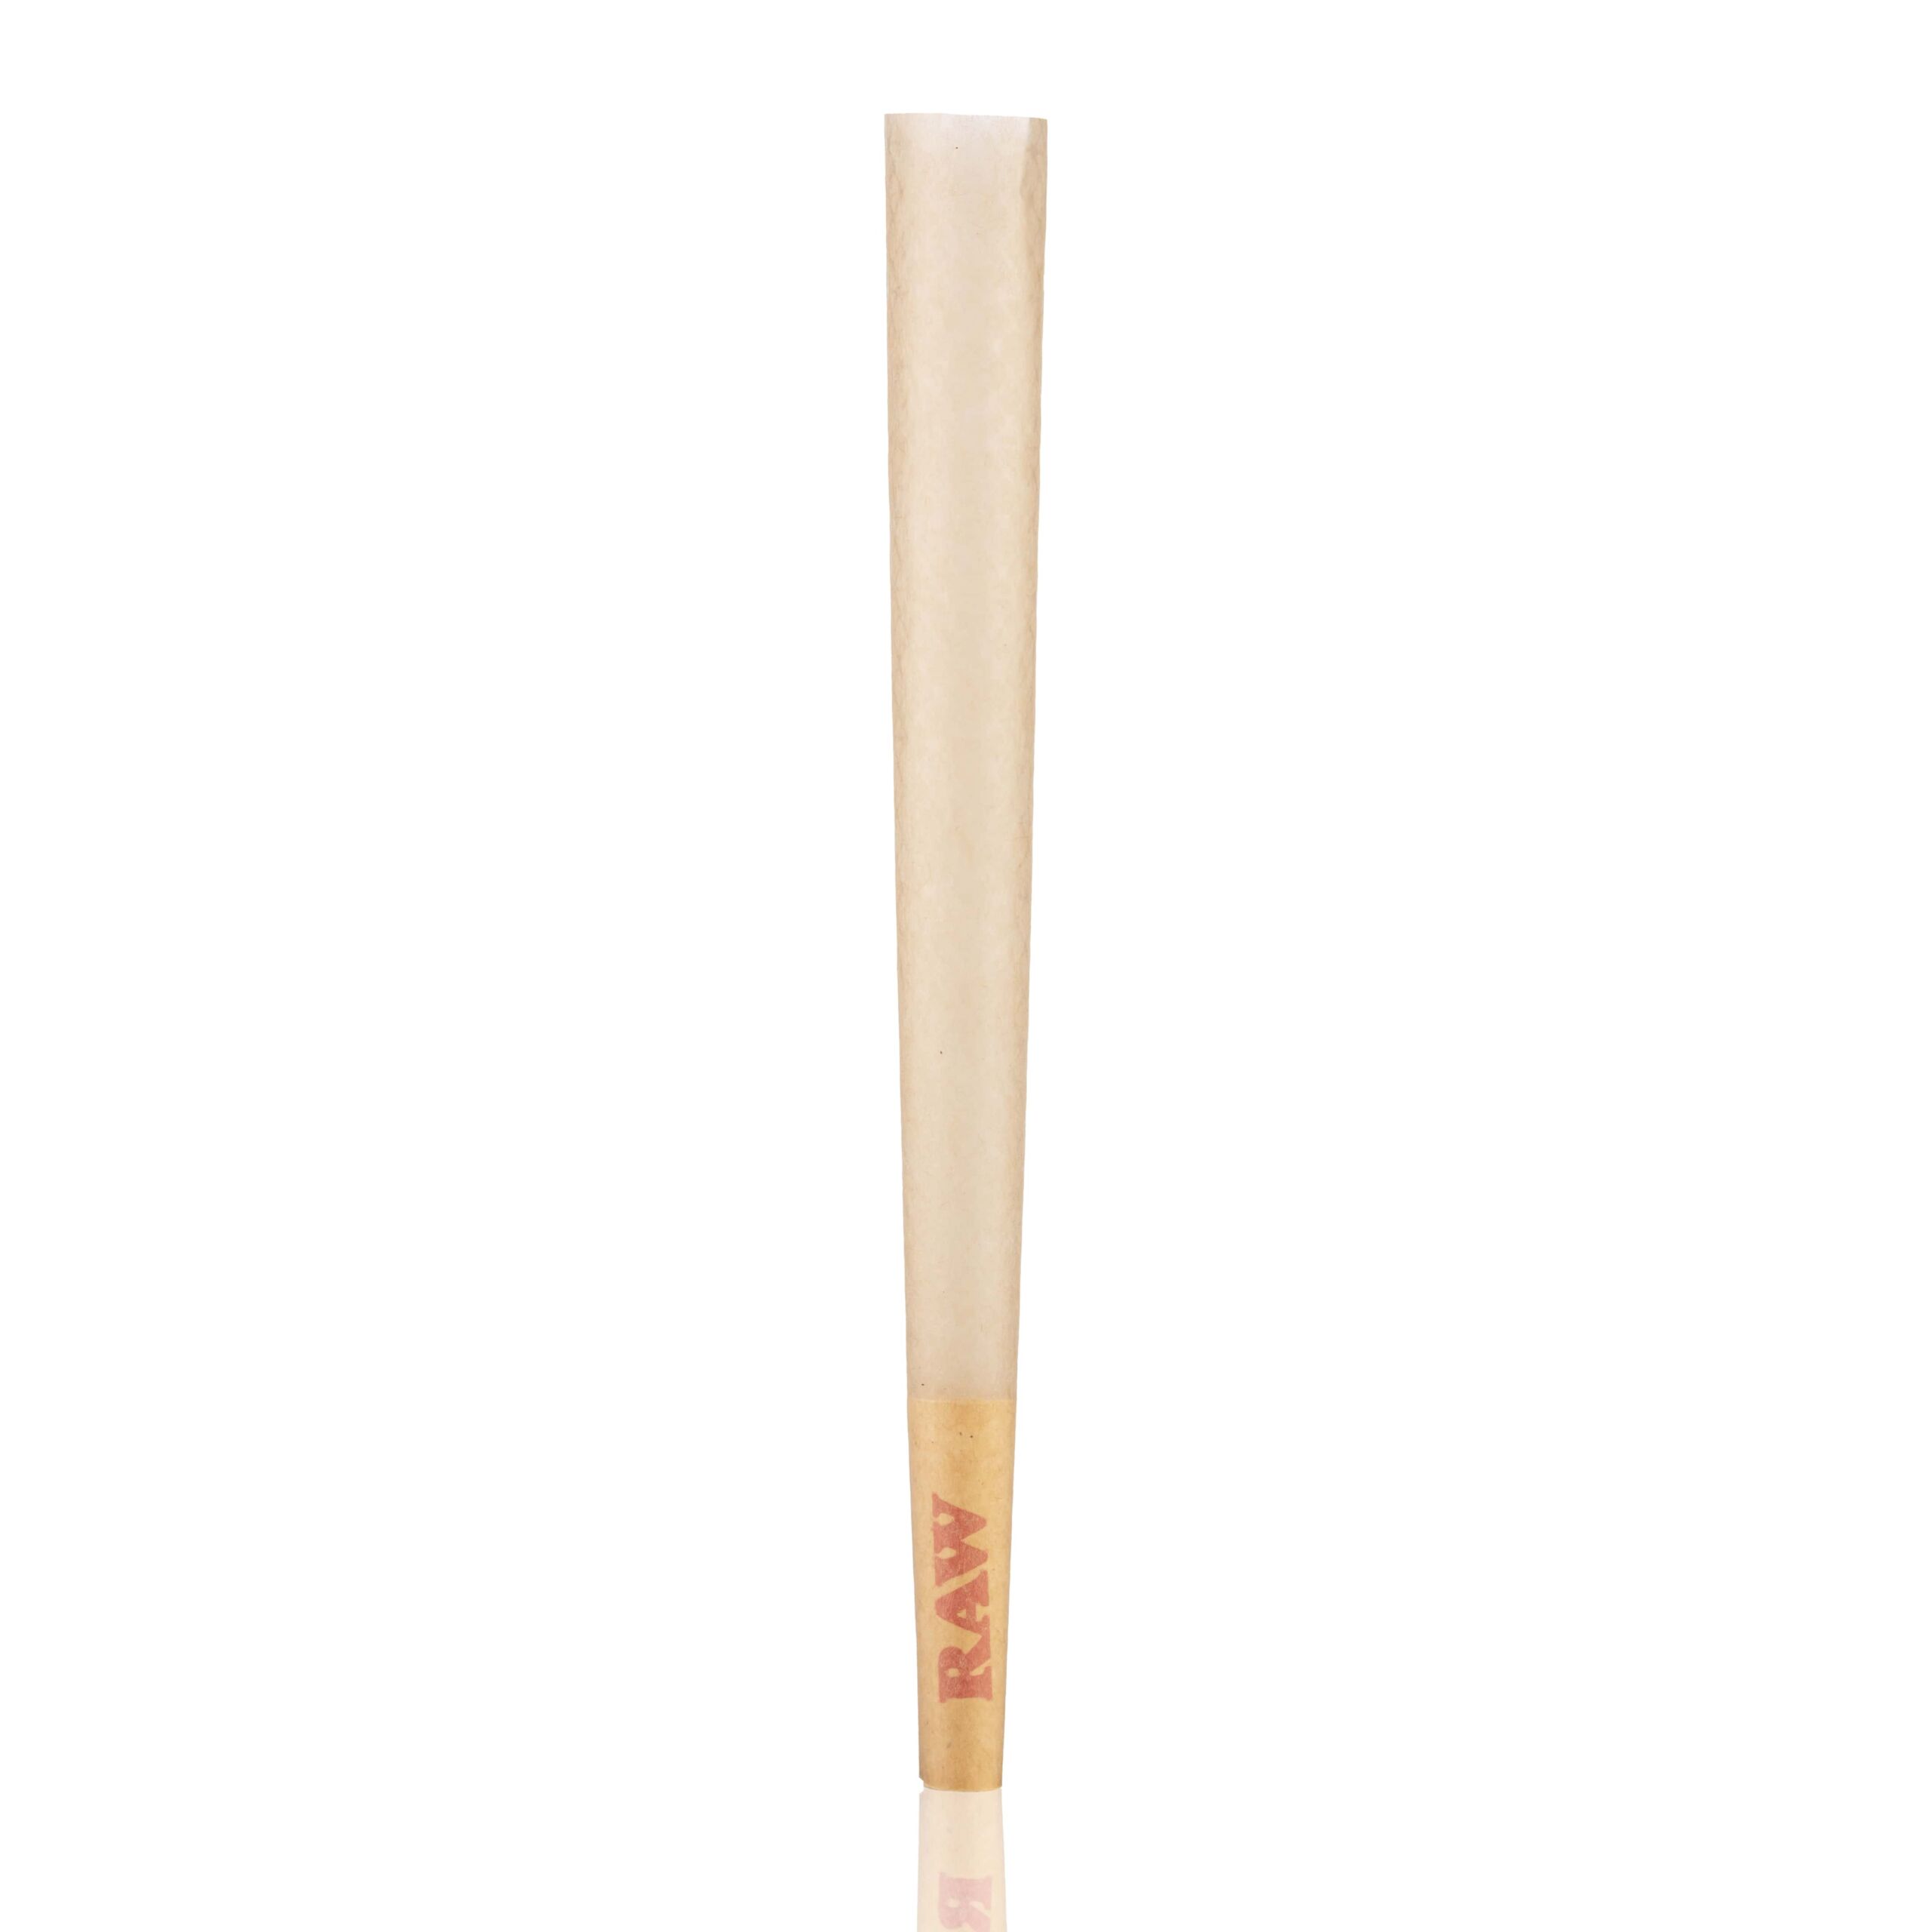 RAW King Size Cones (109/26mm) Natural Brown Pre-Roll Cone